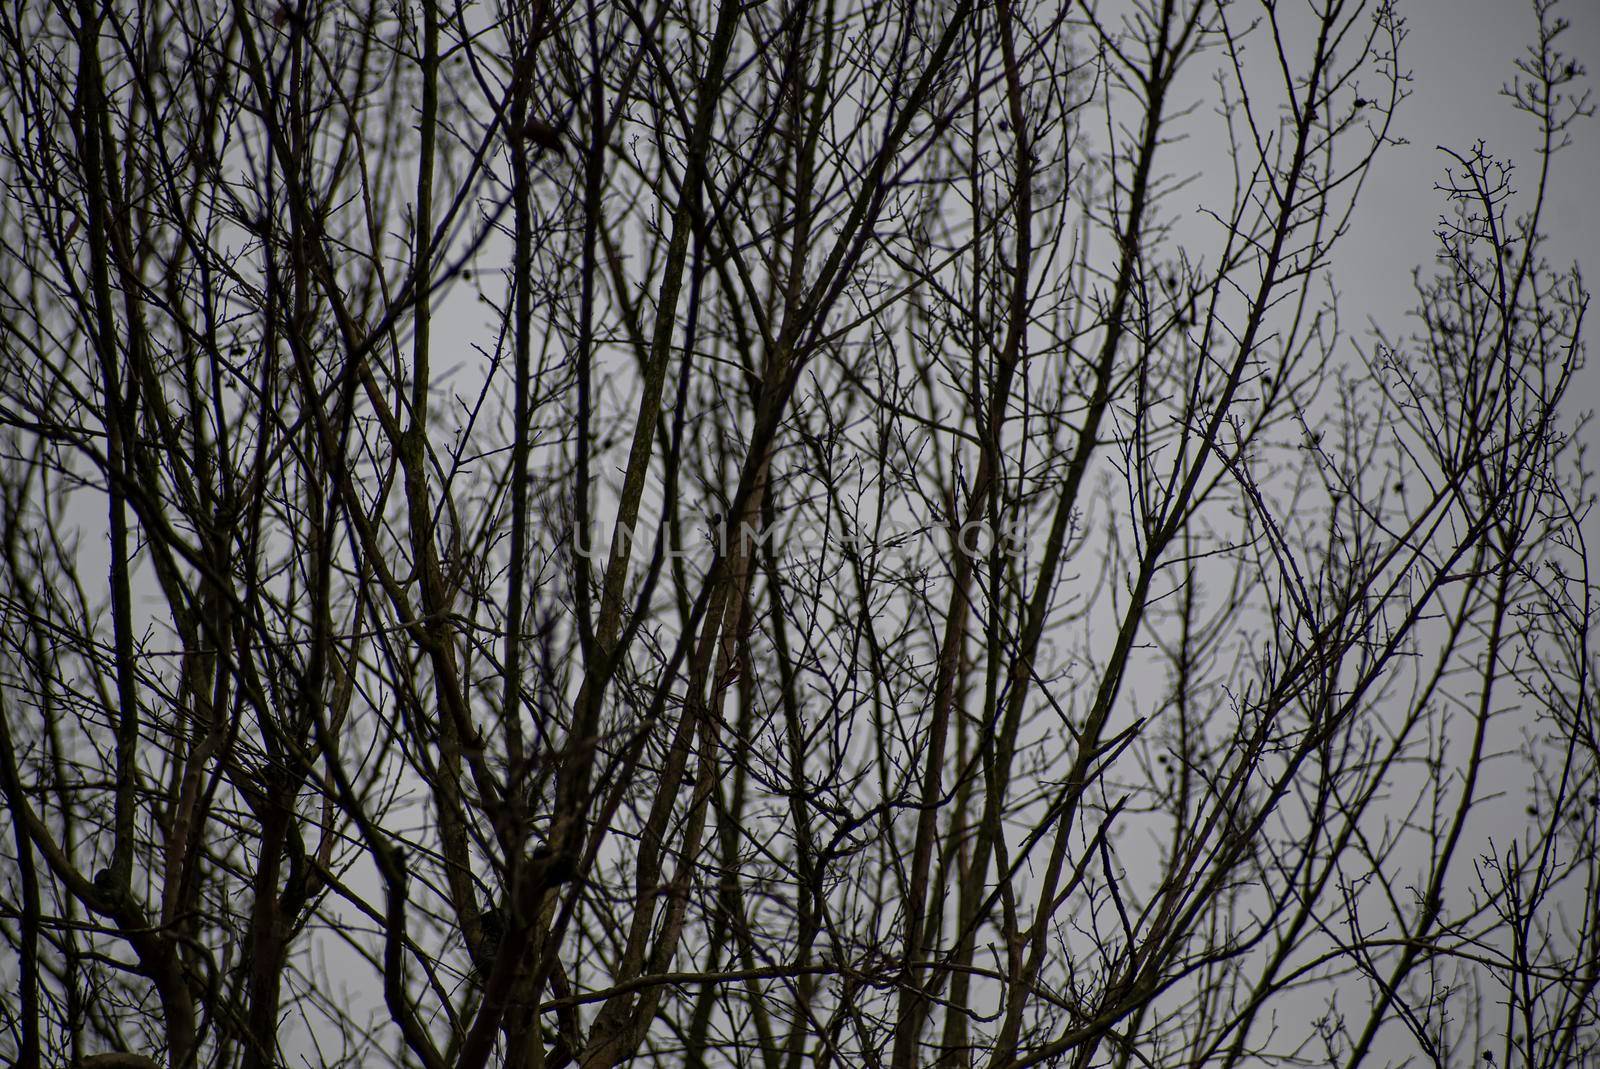 Detail of bare branches in winter 4 by pippocarlot